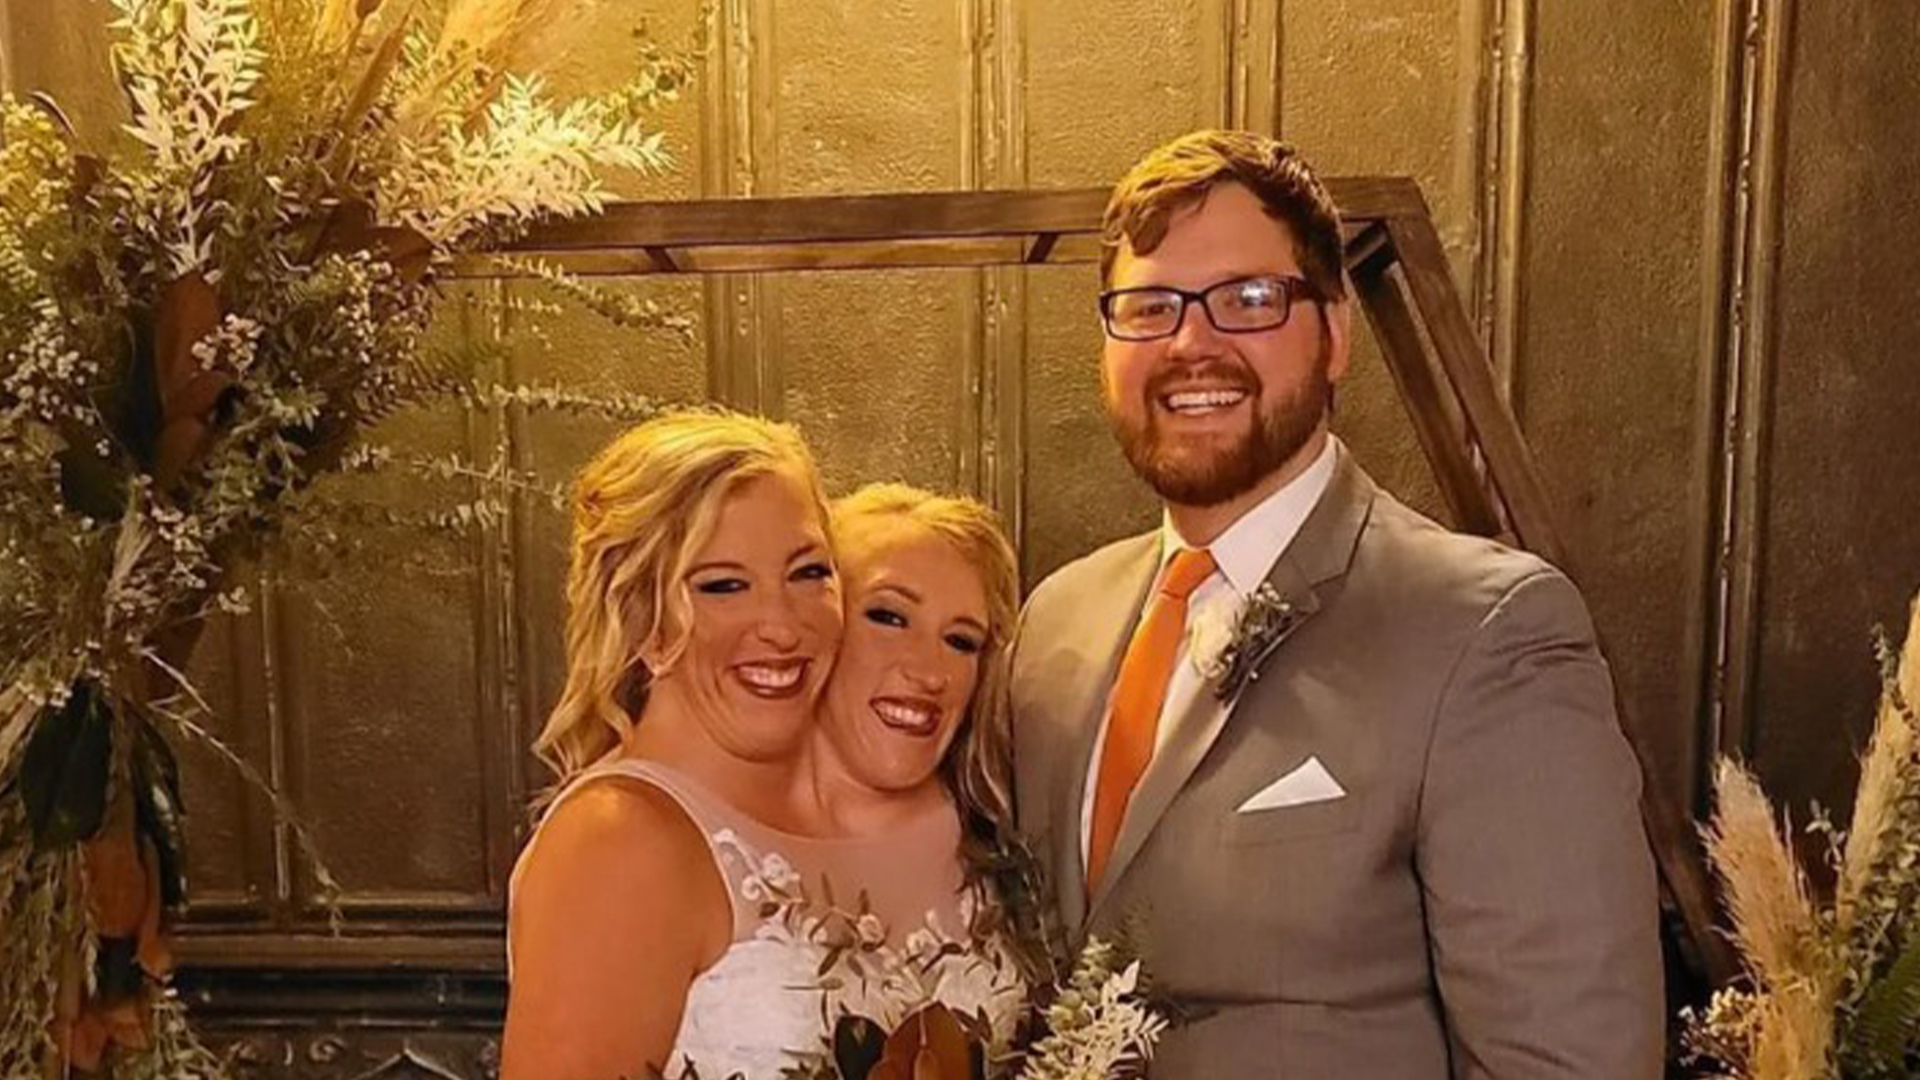 “Abby Hensel’s Husband Faces Paternity Suit from Ex-Wife After Tying the Knot with Famous Conjoined Twin” – Scandal Unfolds!